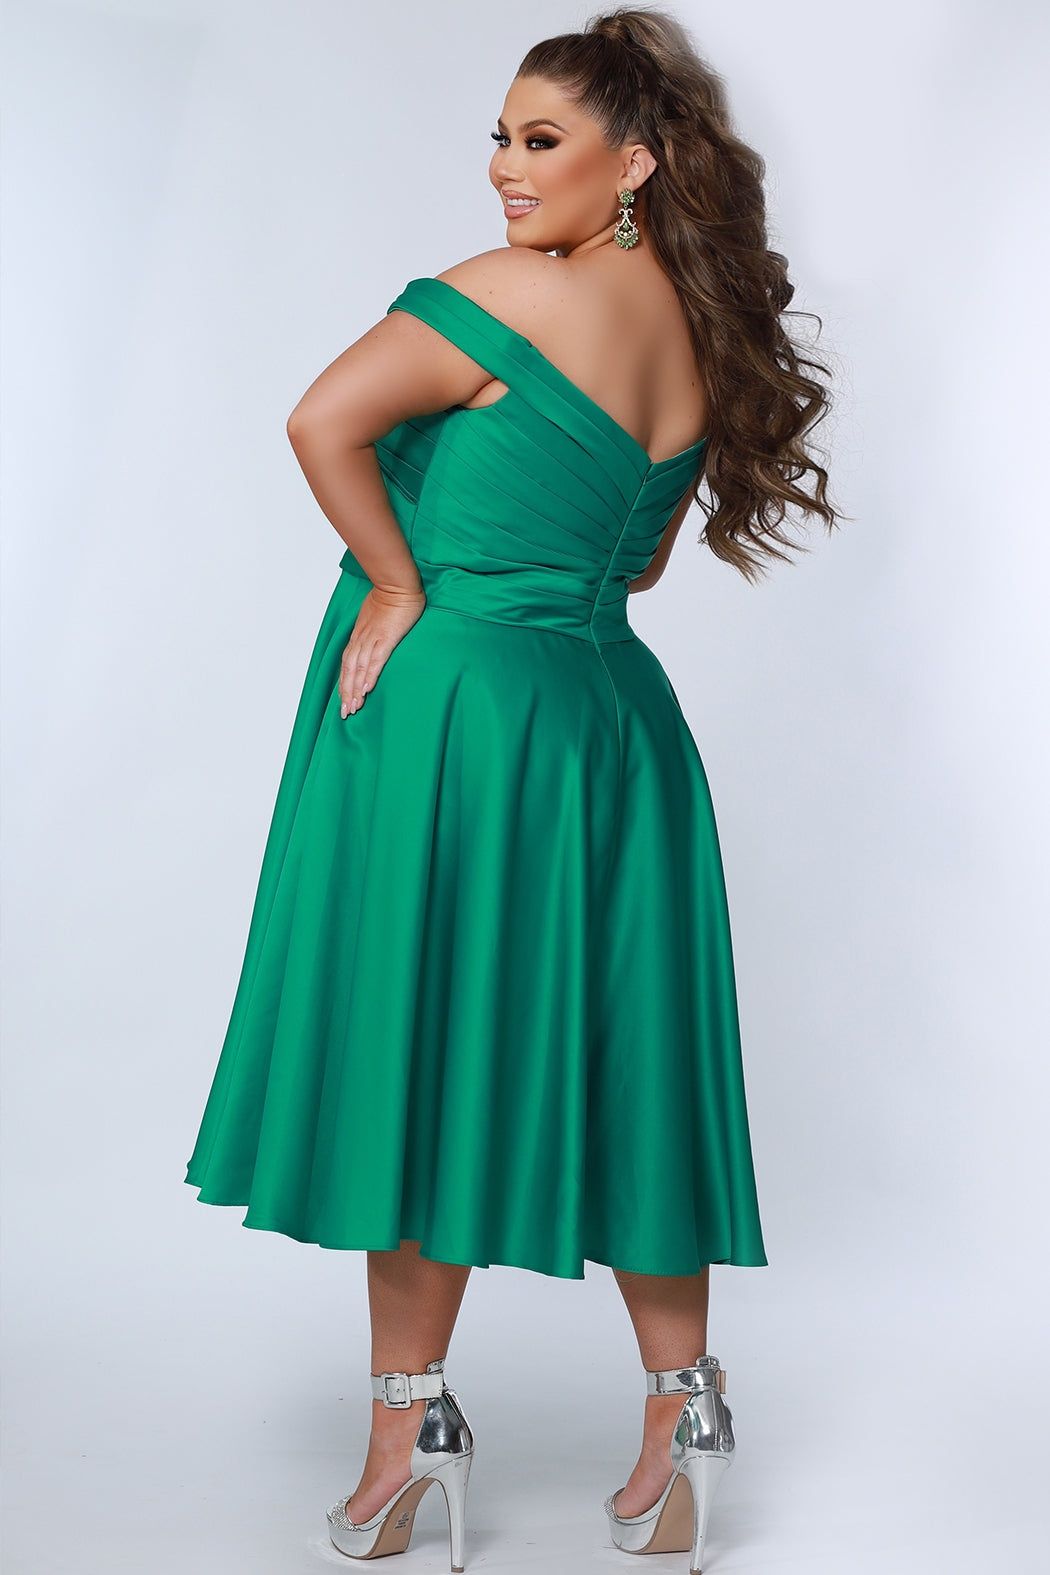 Style CE2301 Sydney's Closet Plus Size 28 Satin Emerald Green Cocktail Dress on Queenly